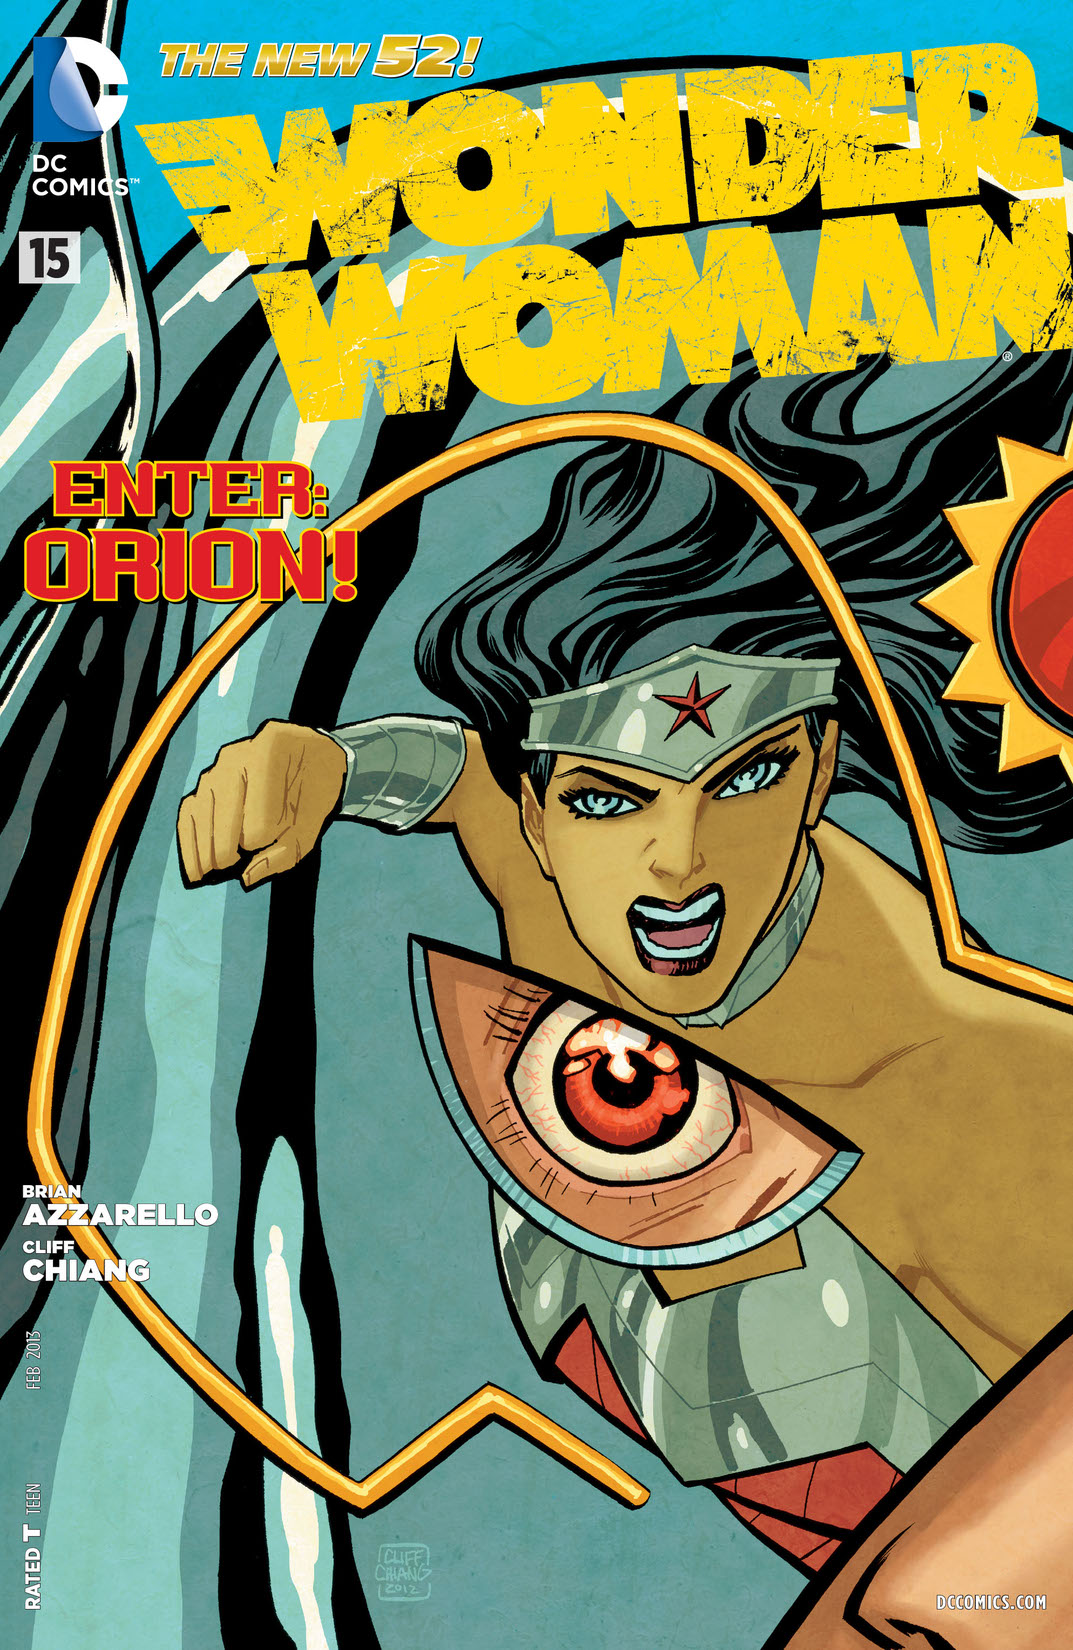 Wonder Woman (2011-) #15 preview images